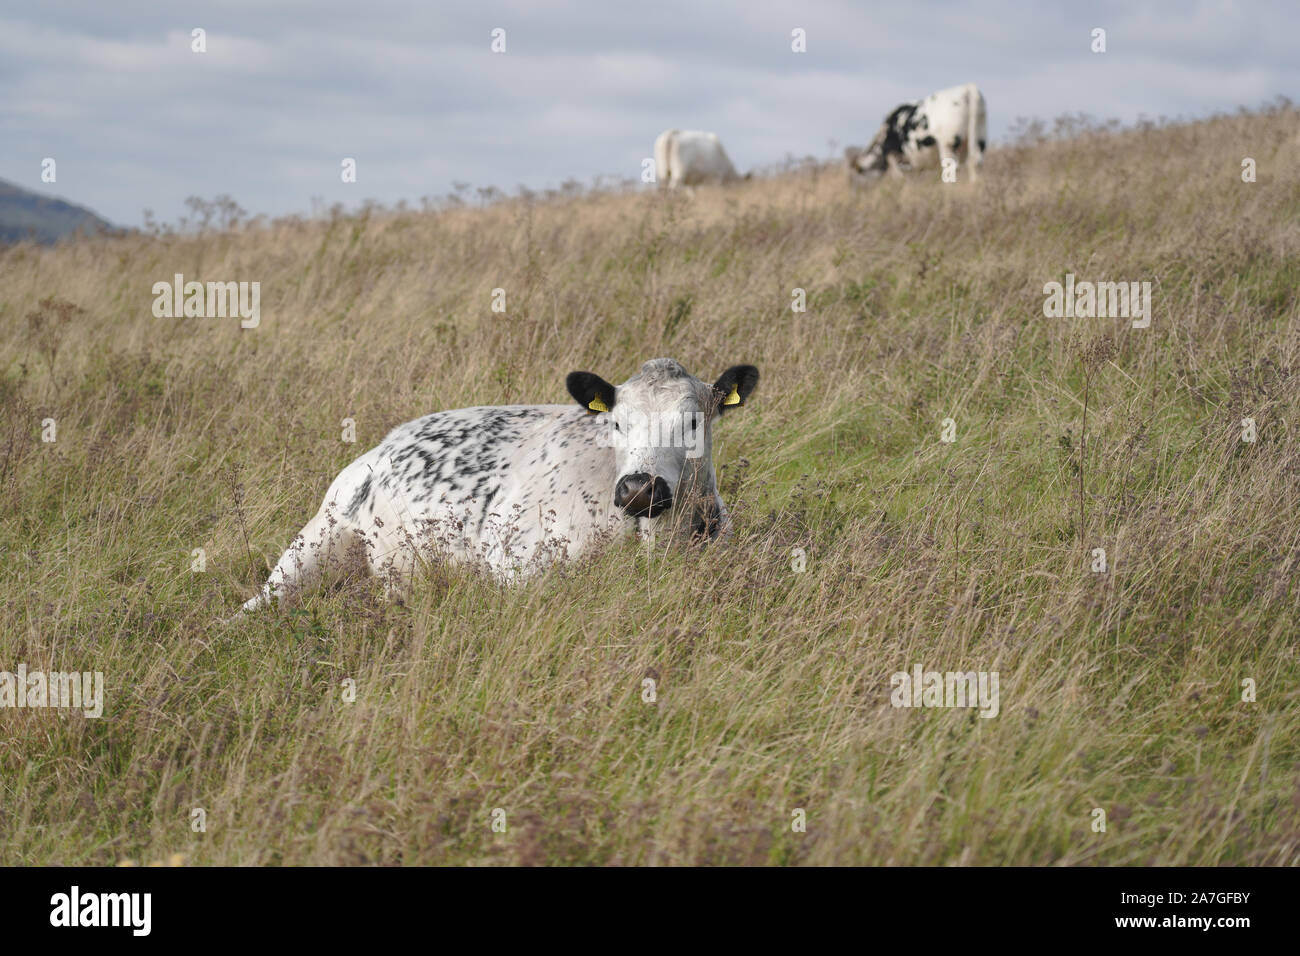 White cows in a field Stock Photo